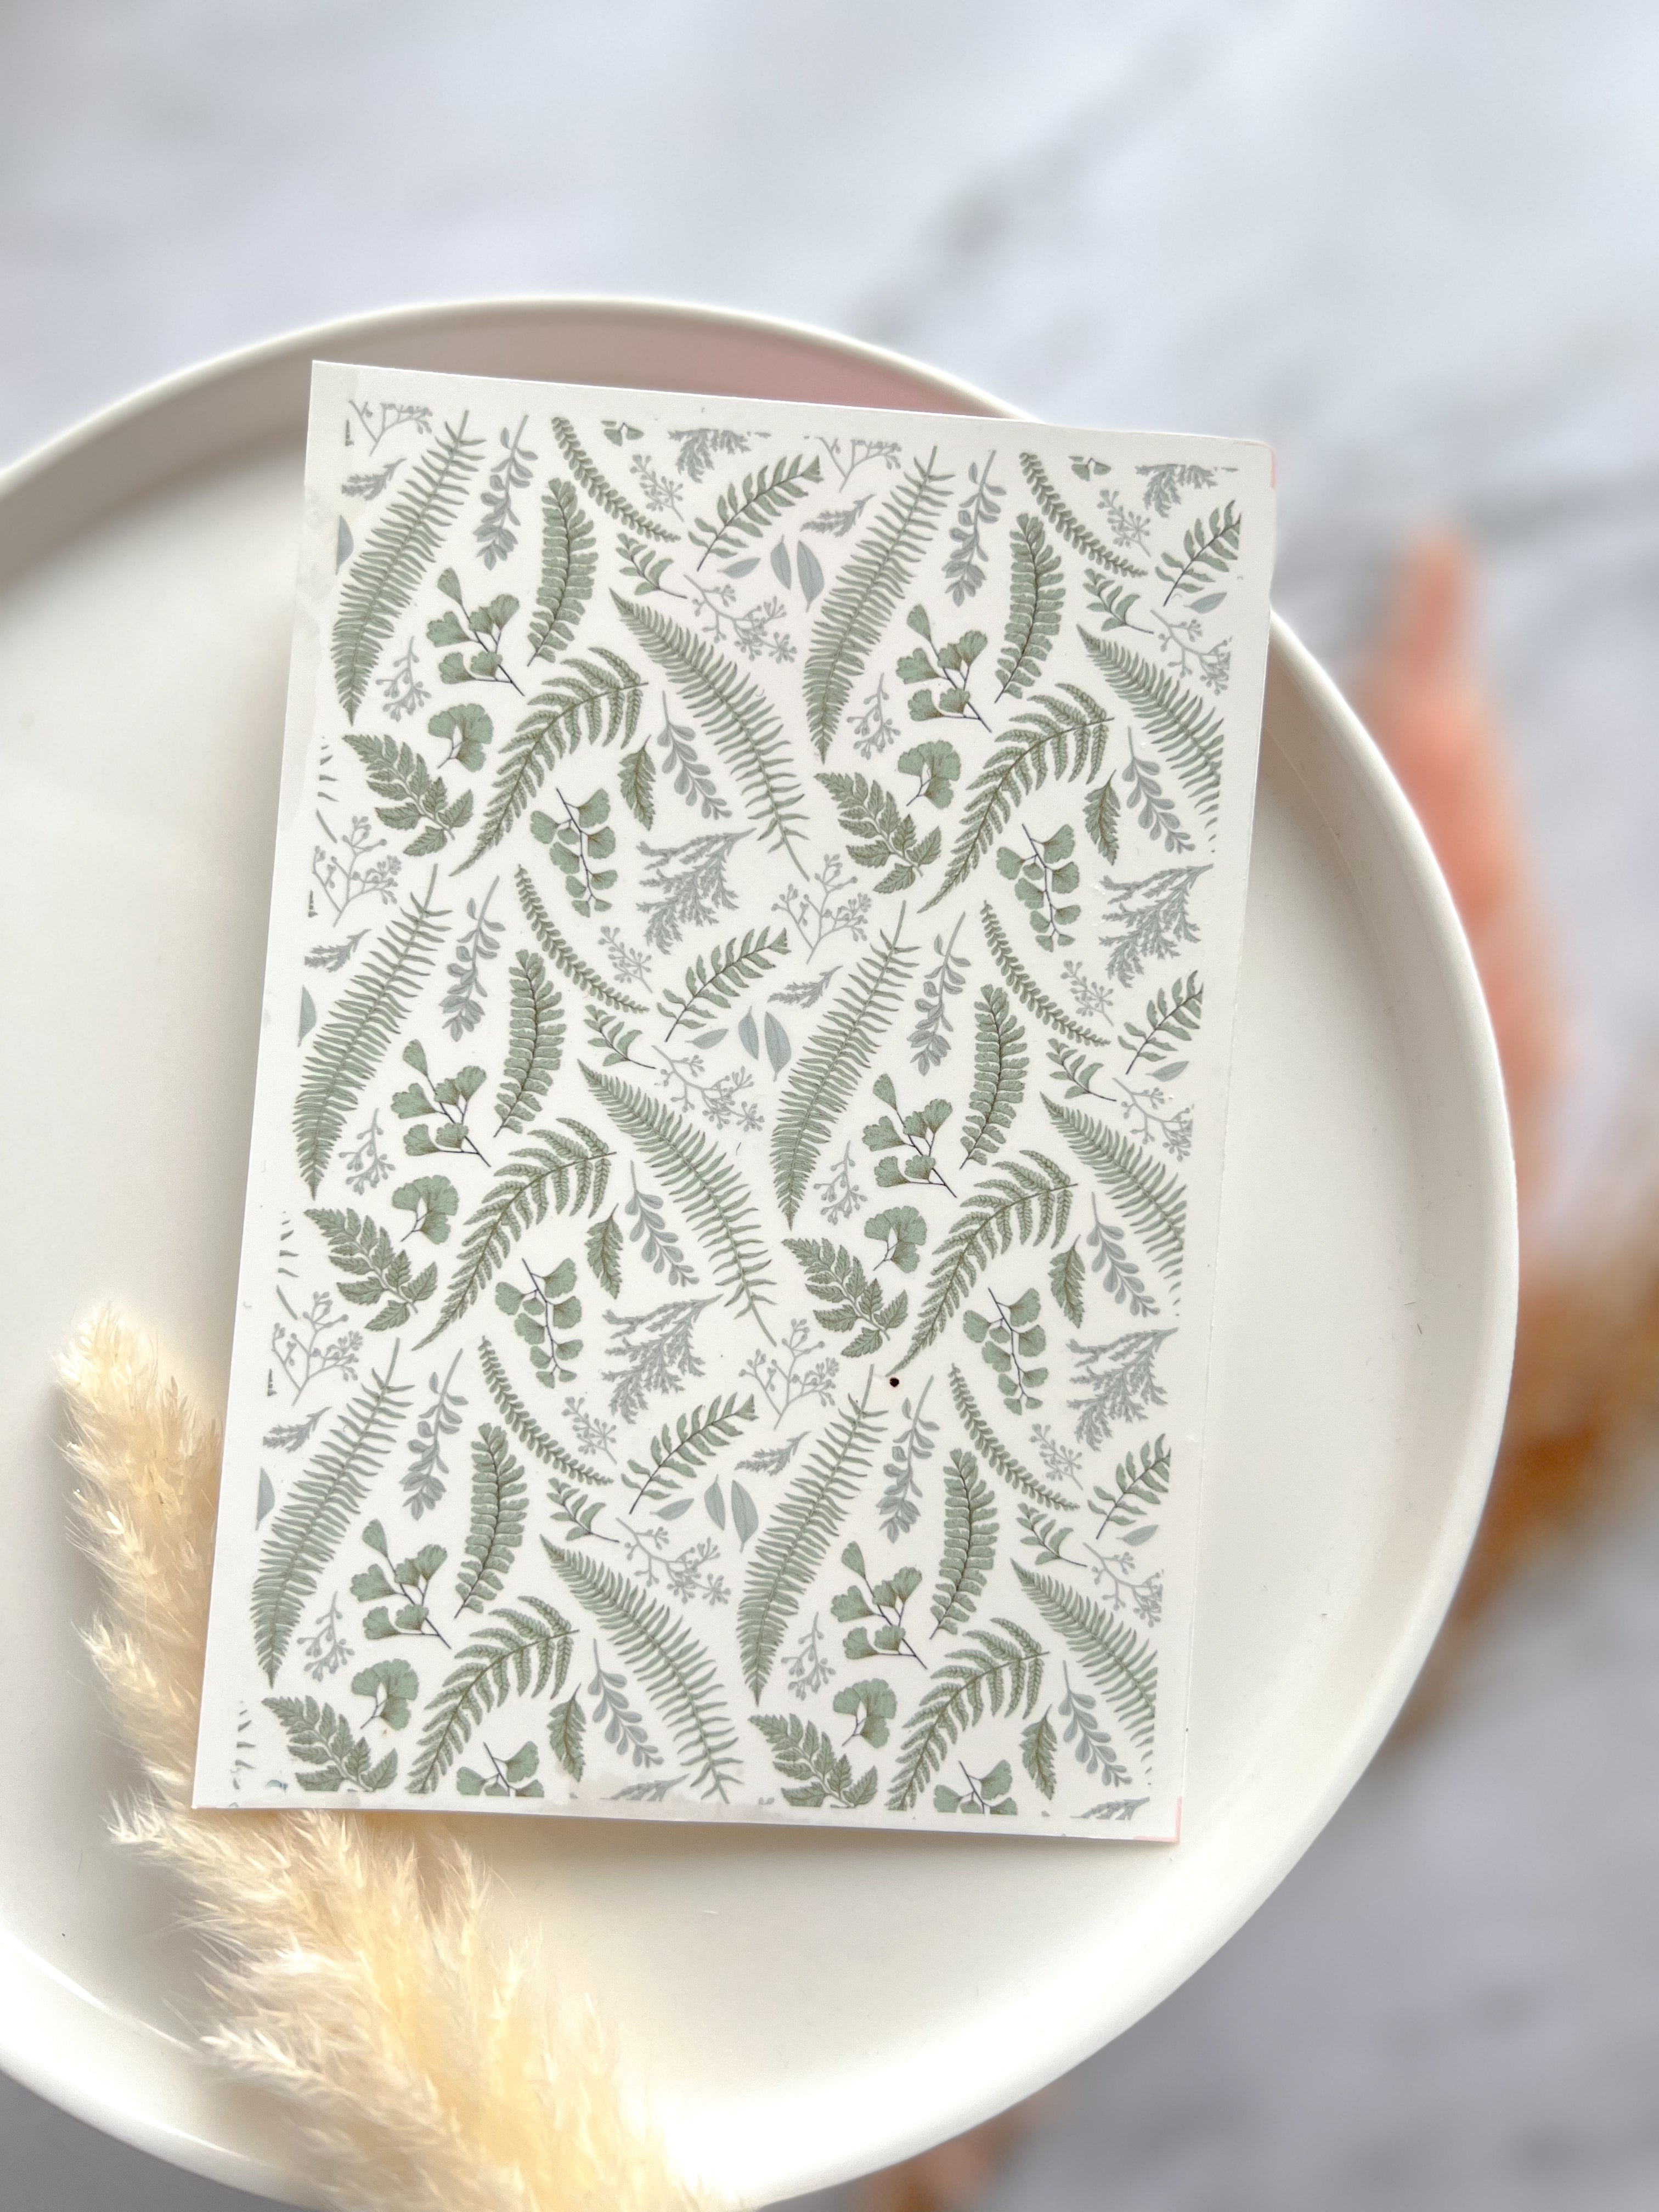 1 Sheet, Approx 13x90cm, Fern Print Water Decal Image Transfer for Polymer Clay / Ceramics